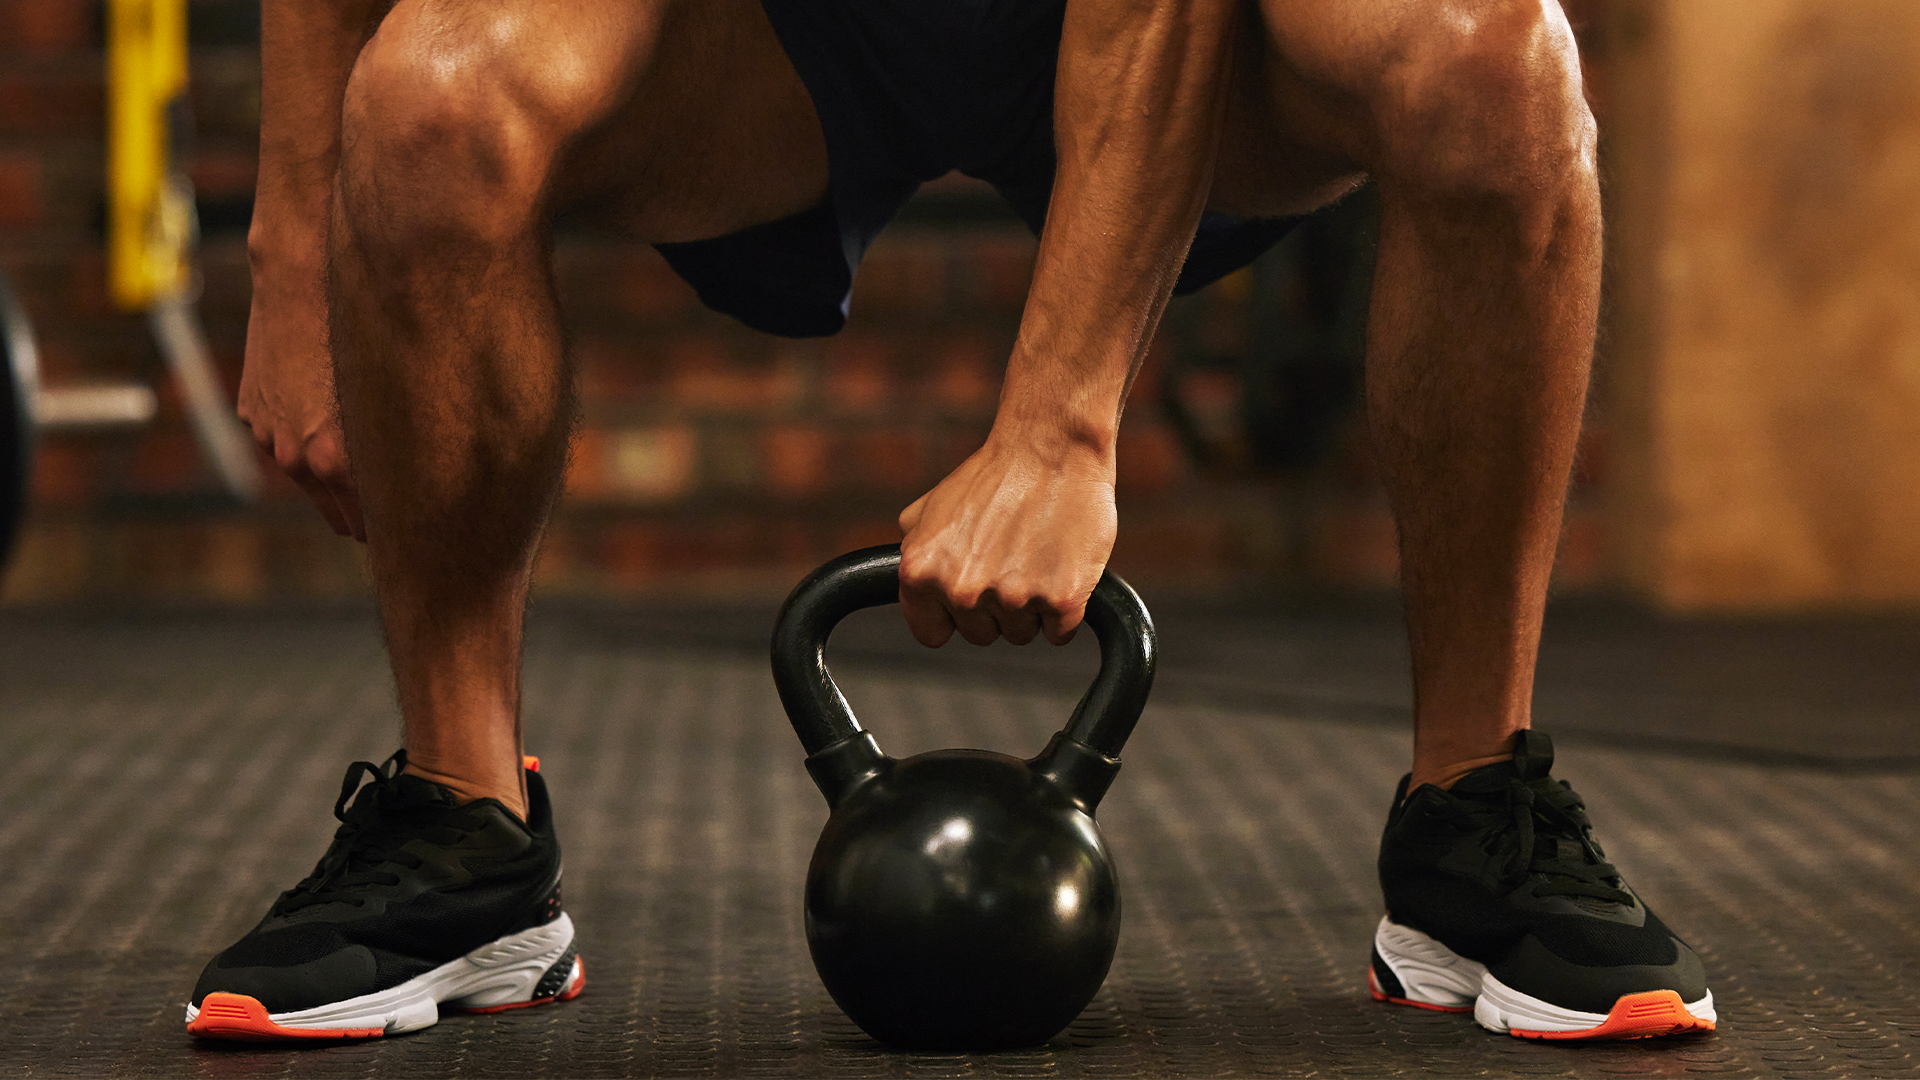 Create a muscle-building workout routine